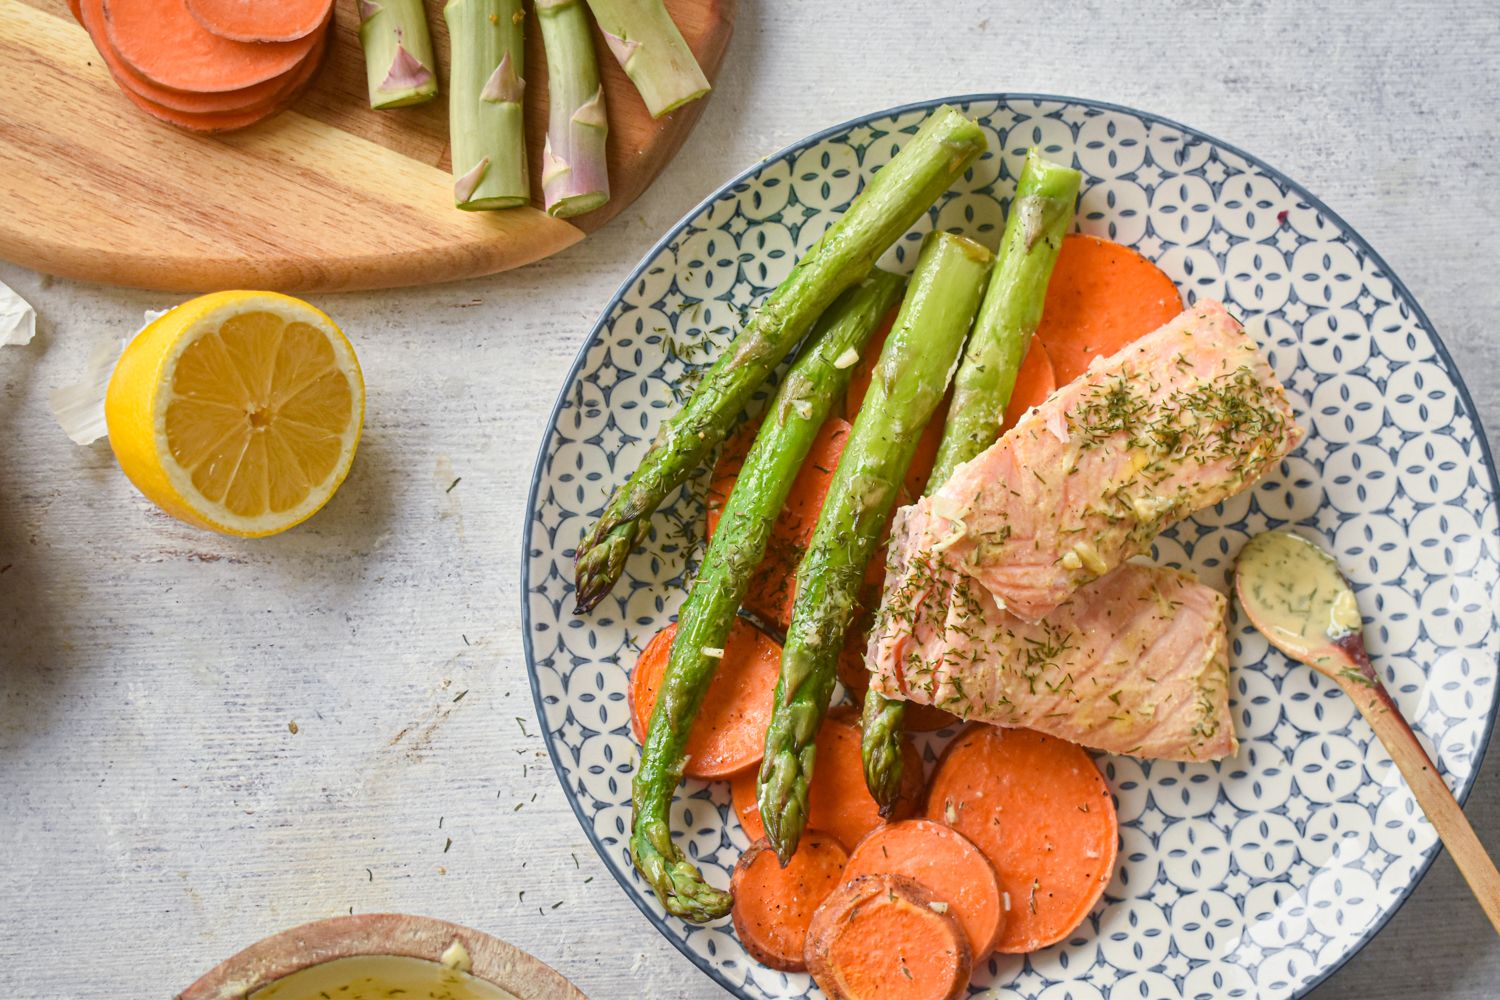 Salmon, sweet potatoes, and asparagus cooked together for a healthy sheet pan dinner.